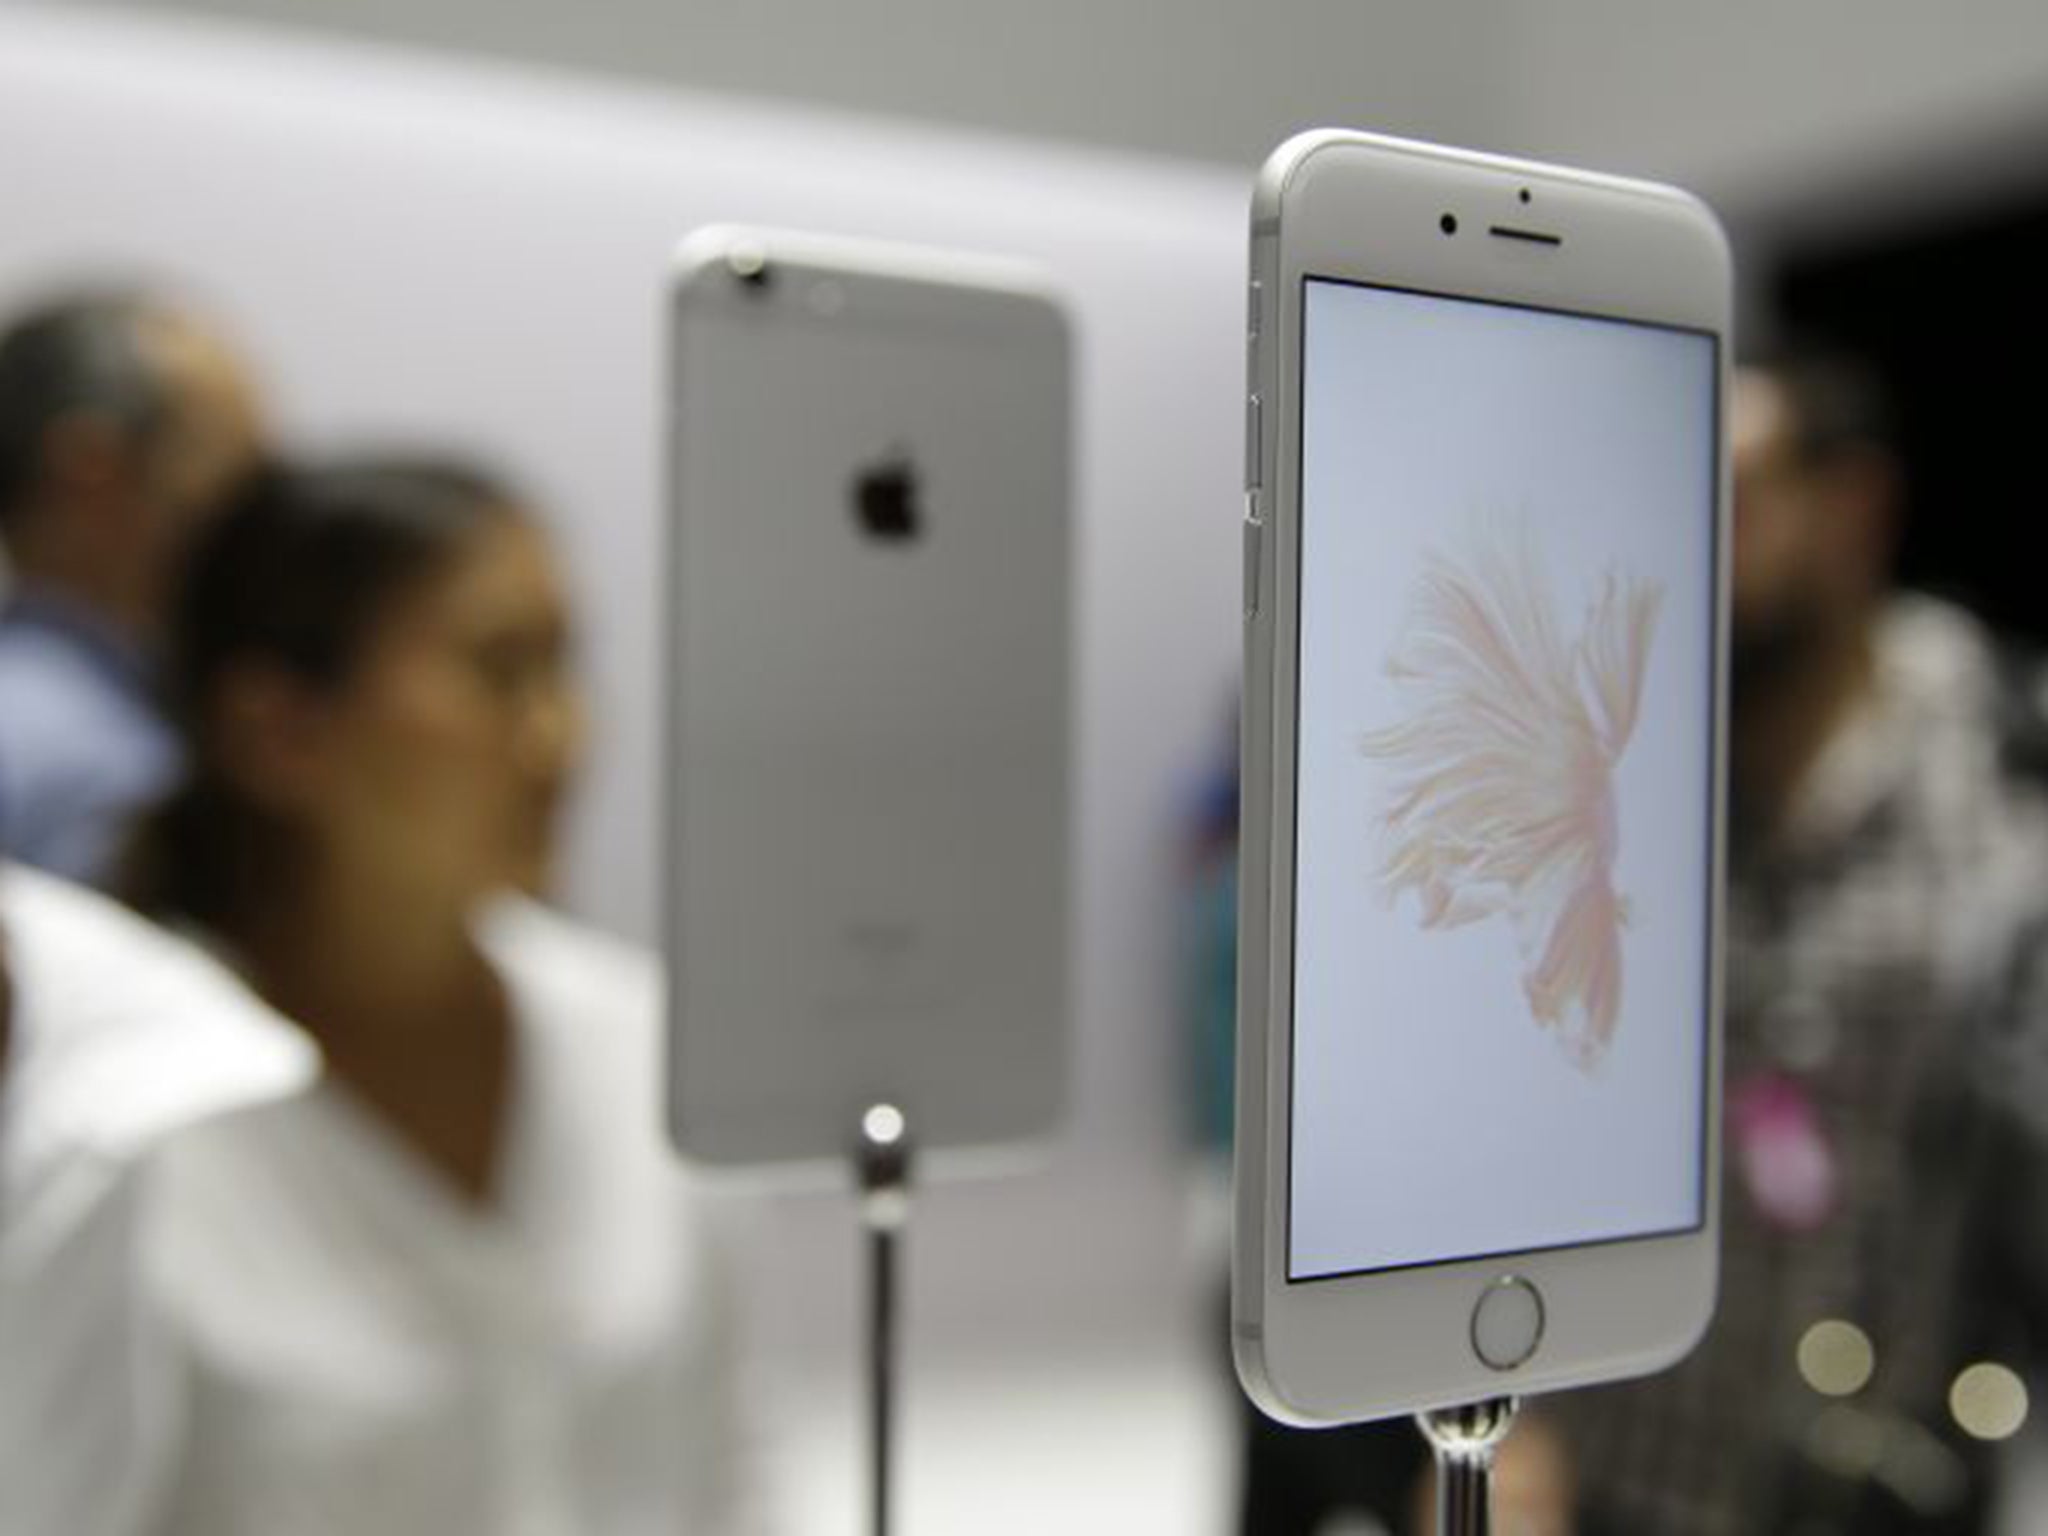 Chinese sperm banks are using the lure of the iPhone 6s to attract potential donors